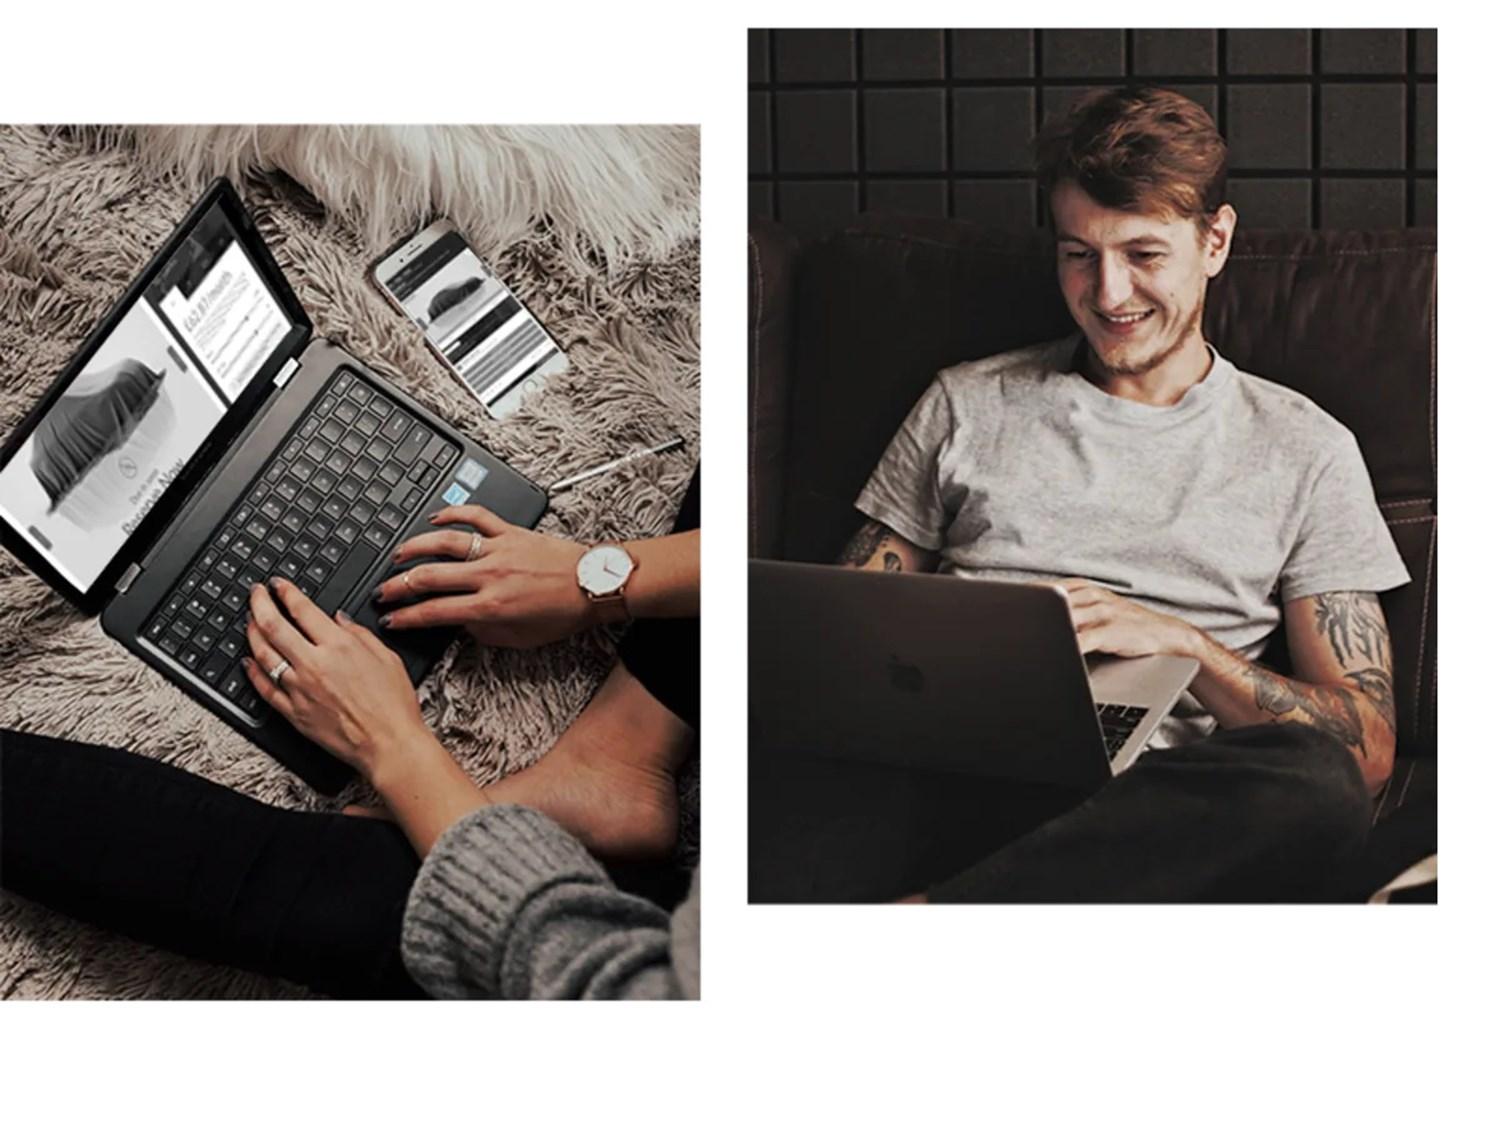 one image of female on laptop from above on rug and one image of man sat down on laptop